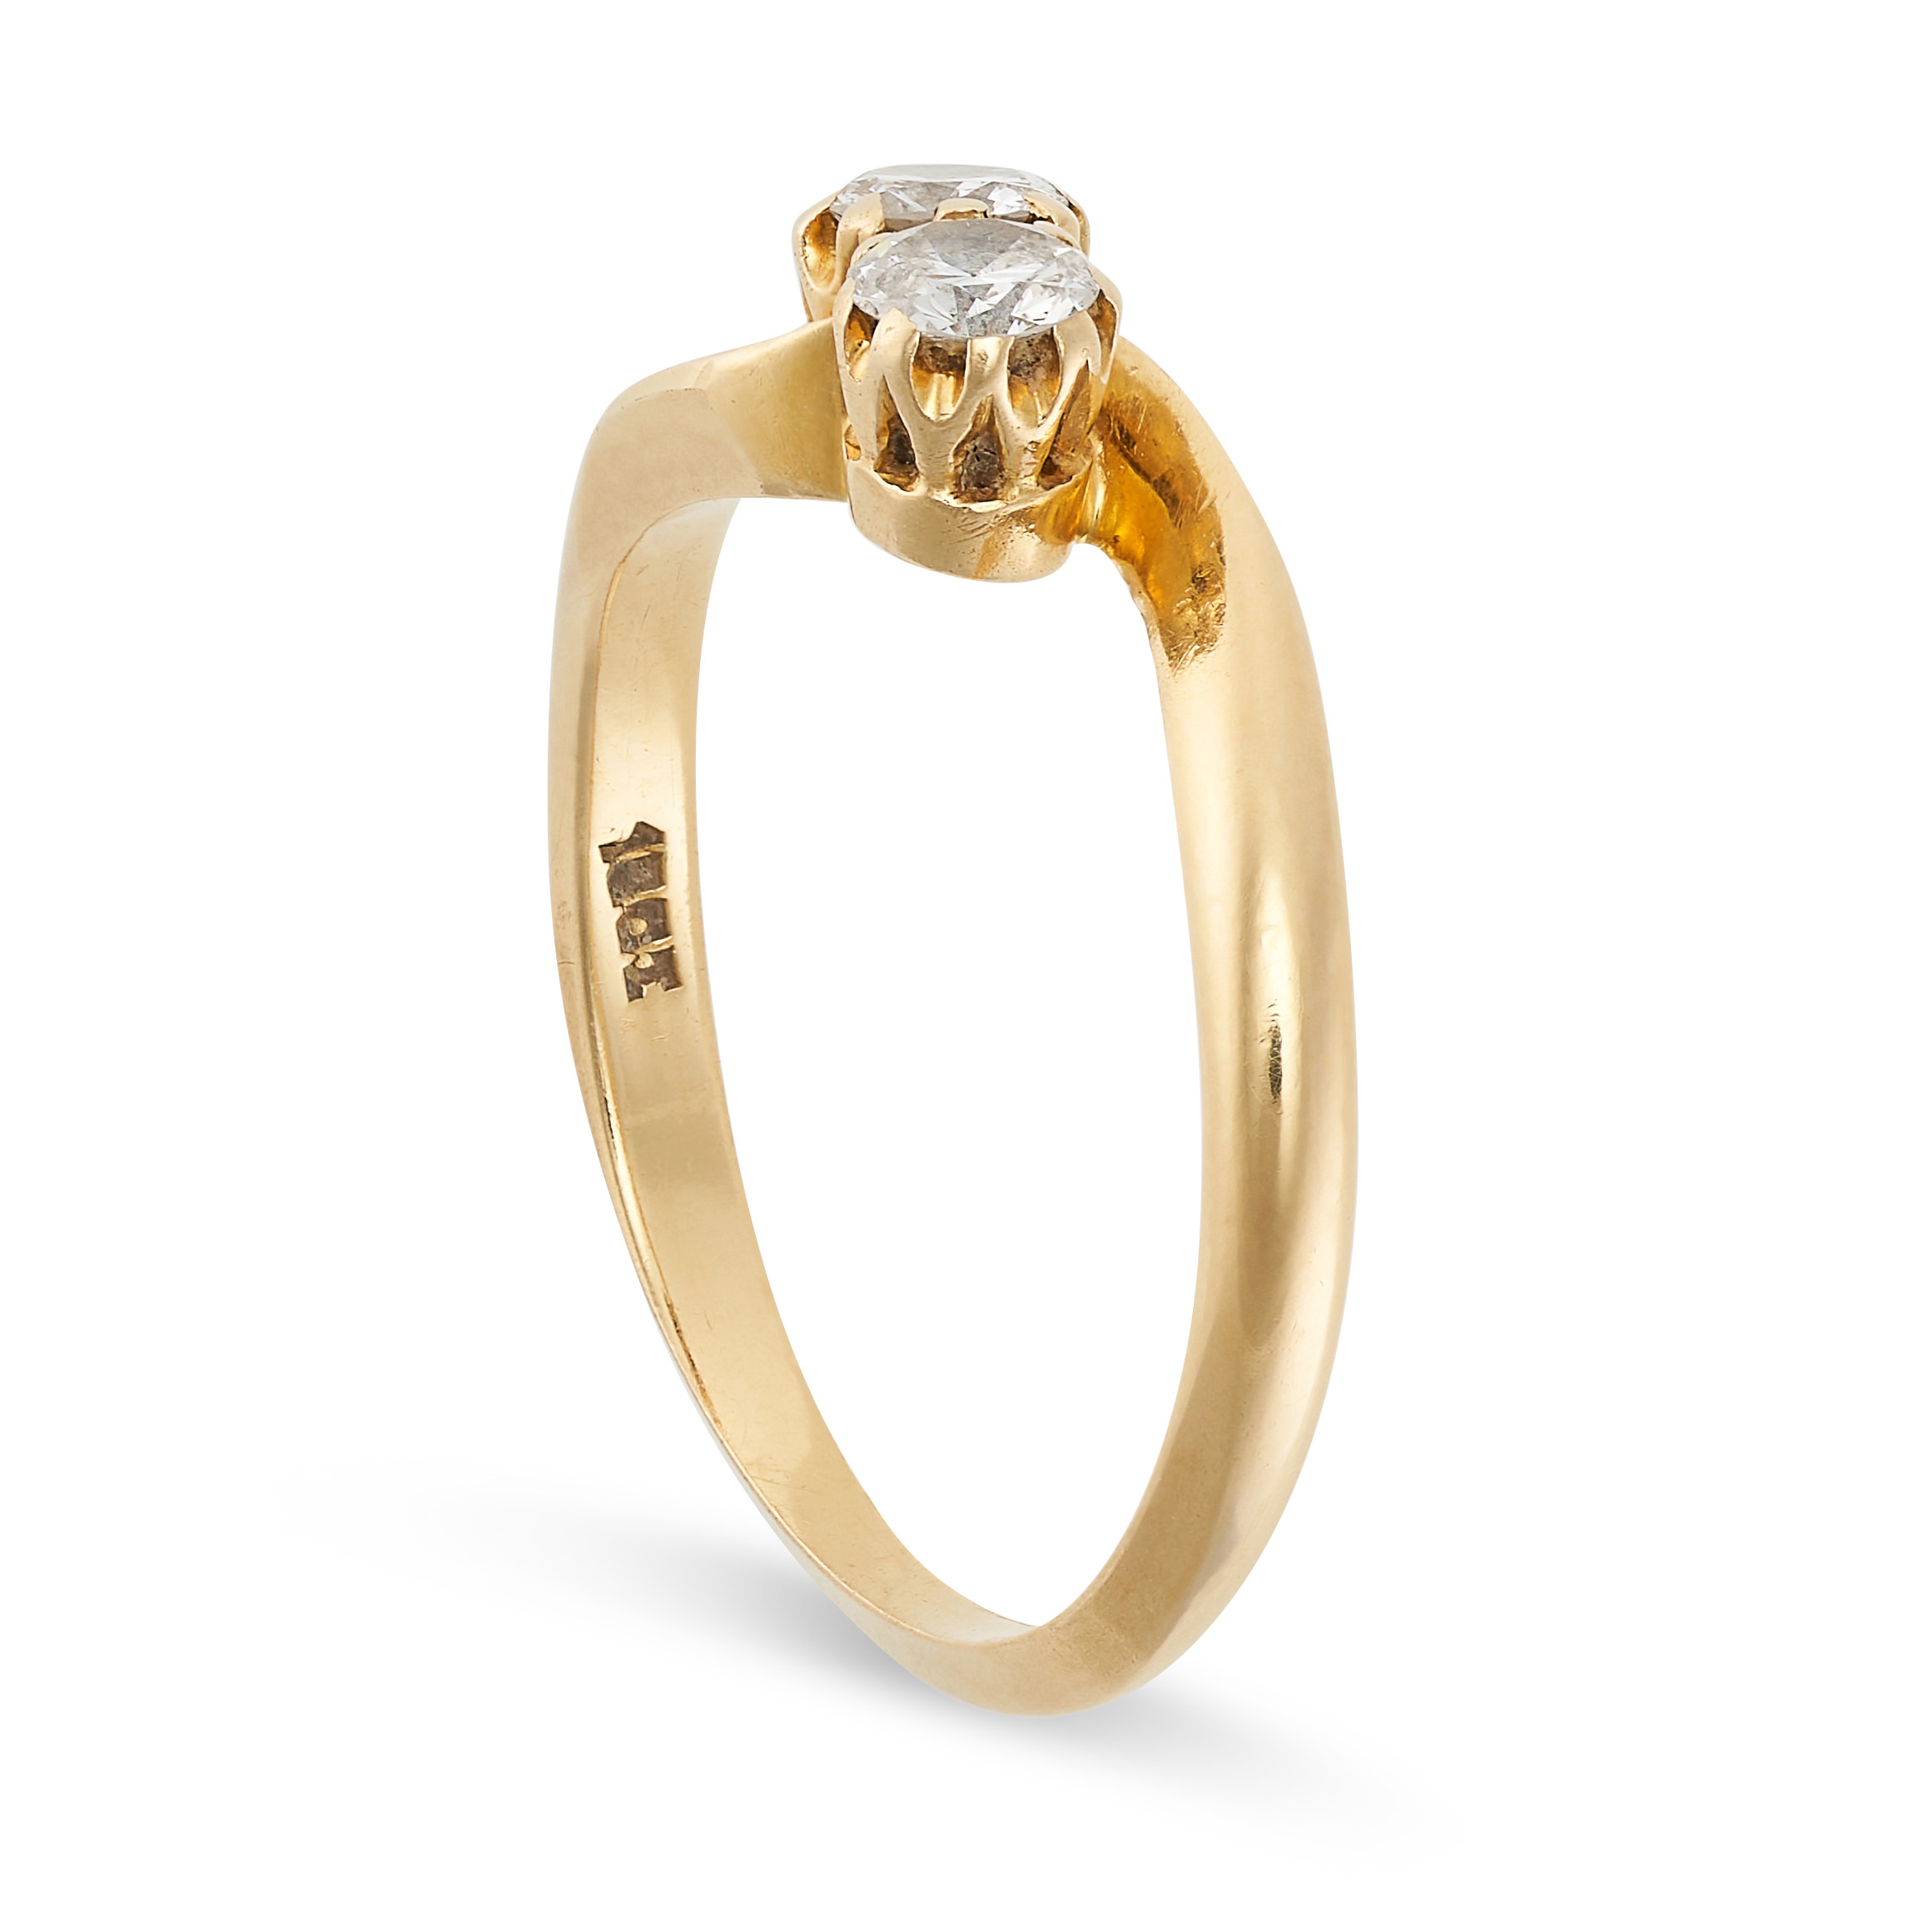 NO RESERVE - A DIAMOND TOI ET MOI RING in 18ct yellow gold, set with two round brilliant cut - Image 2 of 2